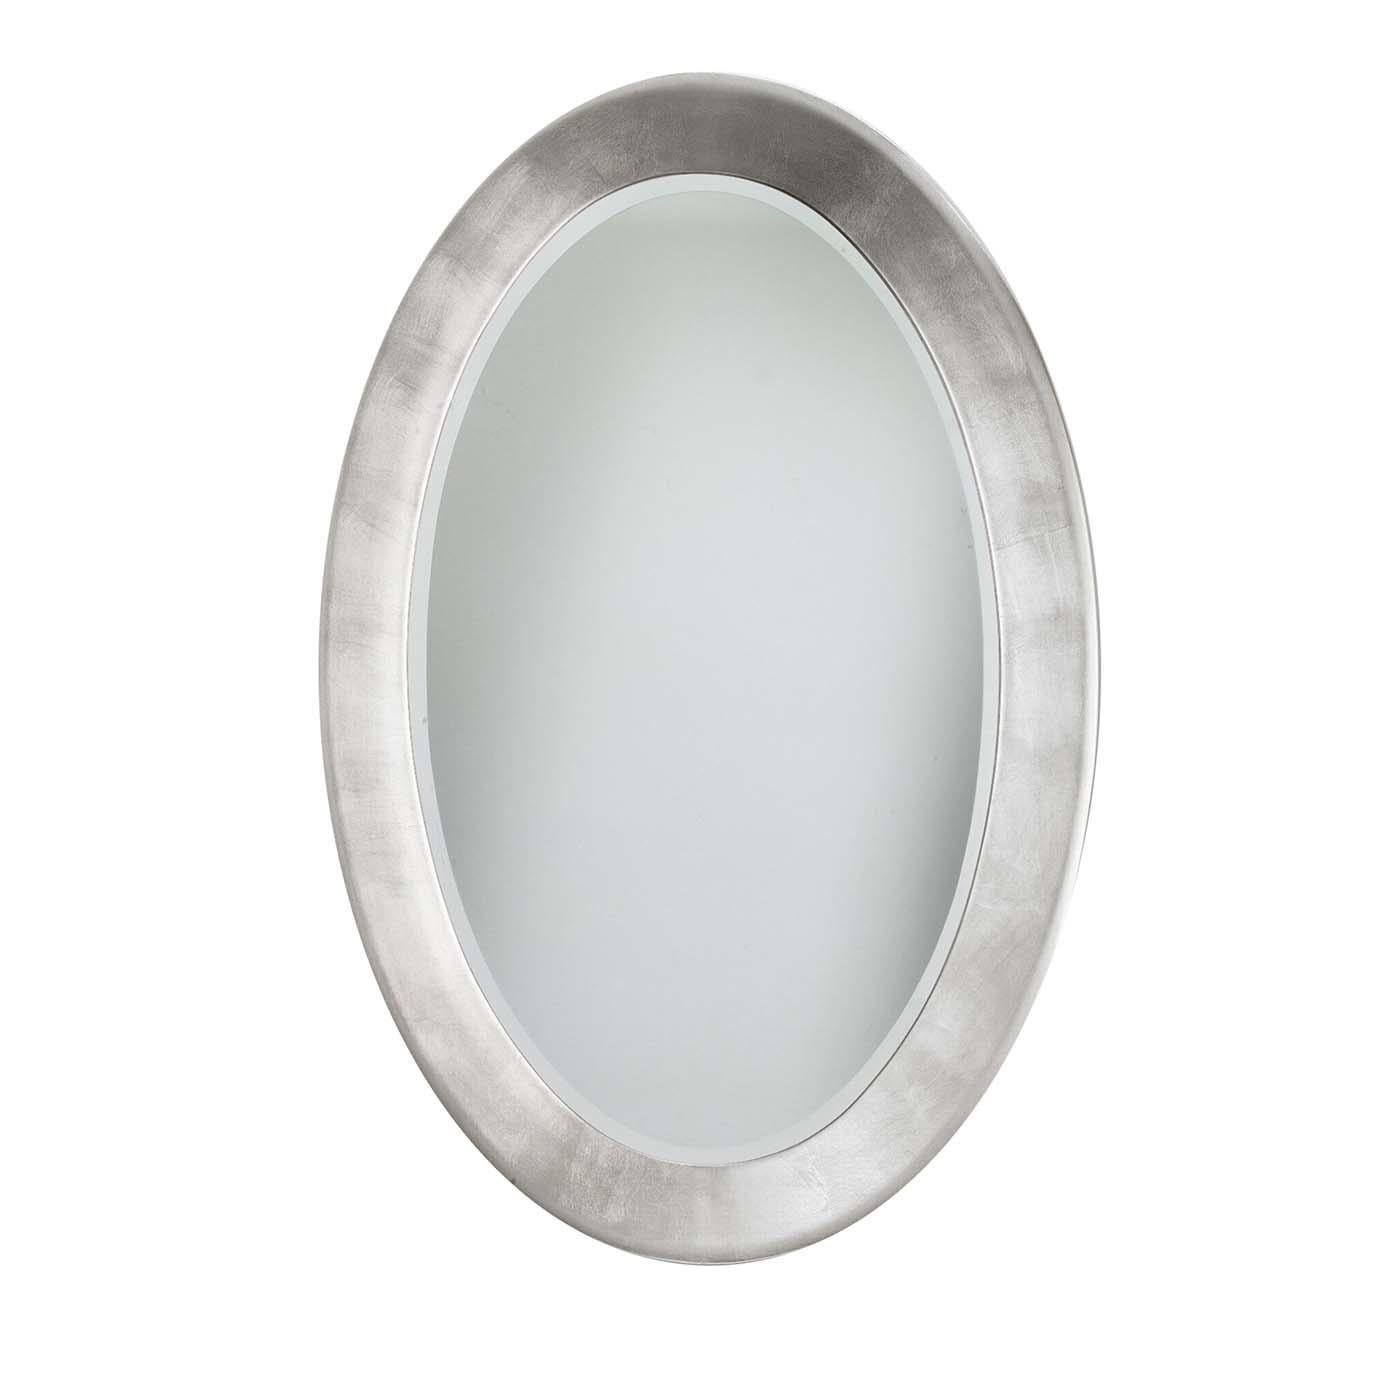 Essential and glamorous, this exquisite wall mirror displays an oval silhouette comprising a reflecting surface in Italian crystal. The wooden frame (10 cm wide and 3.5 cm thick) showcases a bright, hand-applied silver leaf coating and encompasses